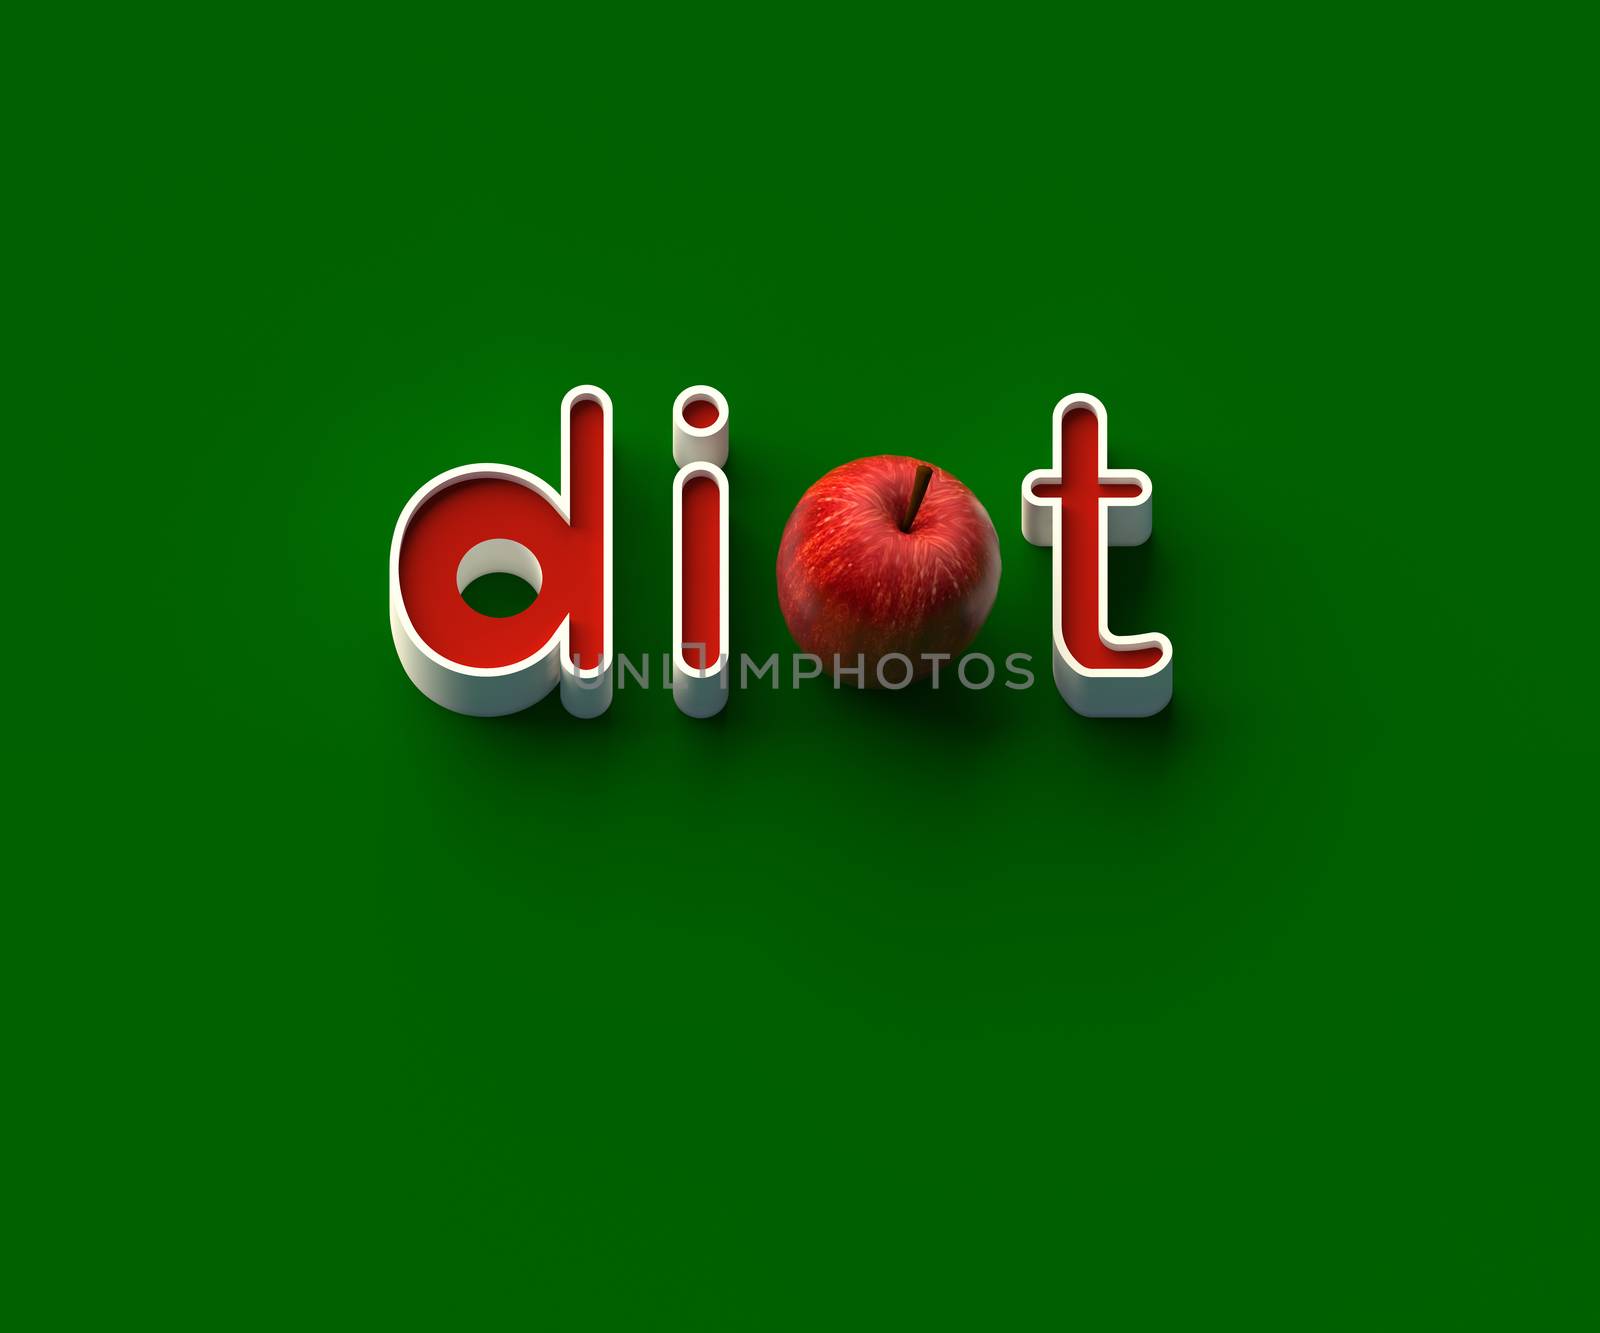 3D RENDERING OF WORDS 'di', AN APPLE AND 't' ON PLAIN BACKGROUND